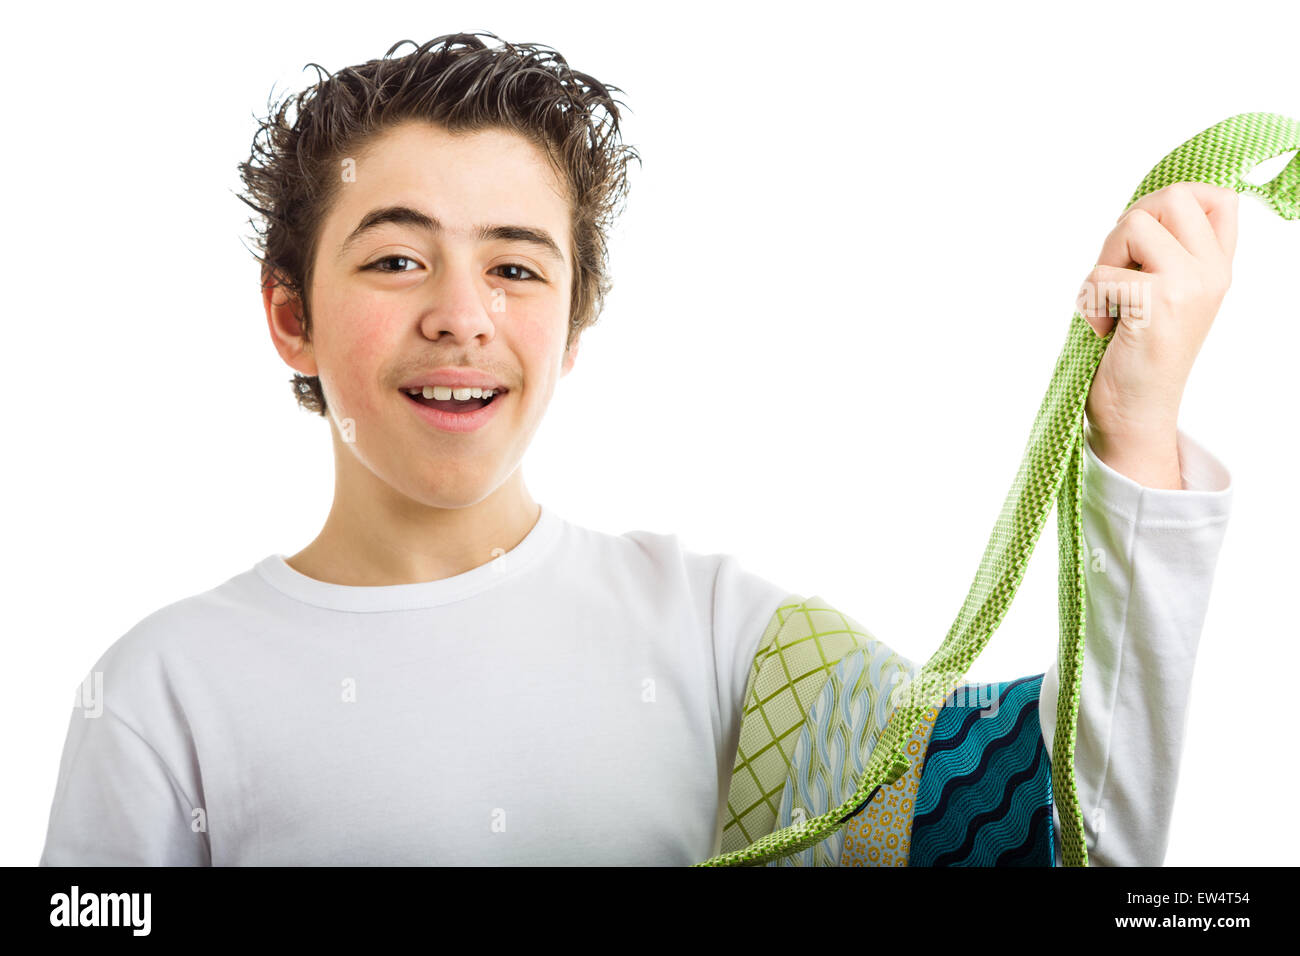 Happy hispanic boy in white long sleeved shirt smiles holding some extravagant and tawdry green ties Stock Photo